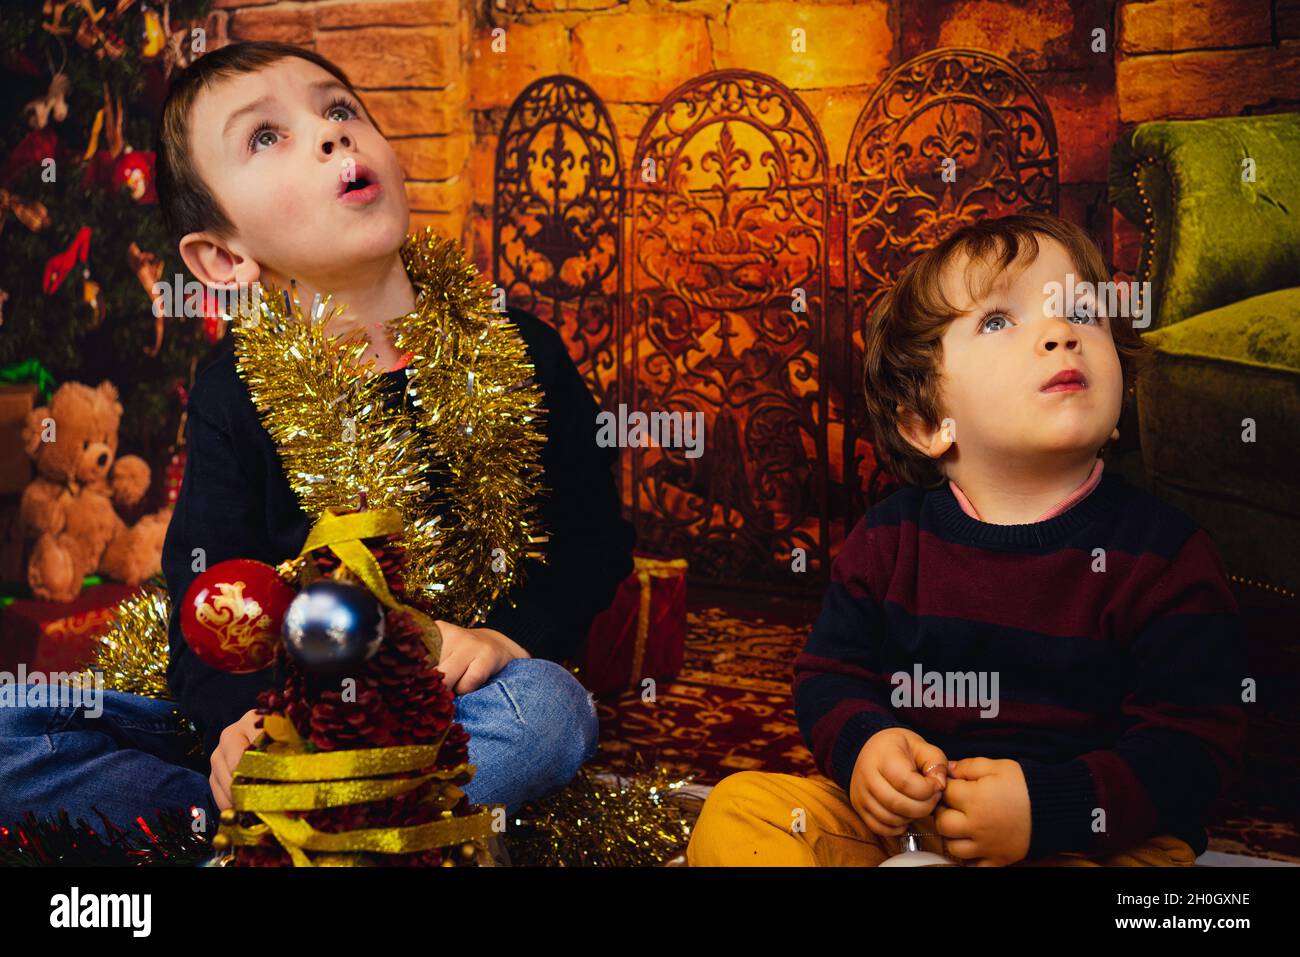 Two surprised baby boys sitting near a Christmas tree surrounded by Christmas decorations, Spain Stock Photo